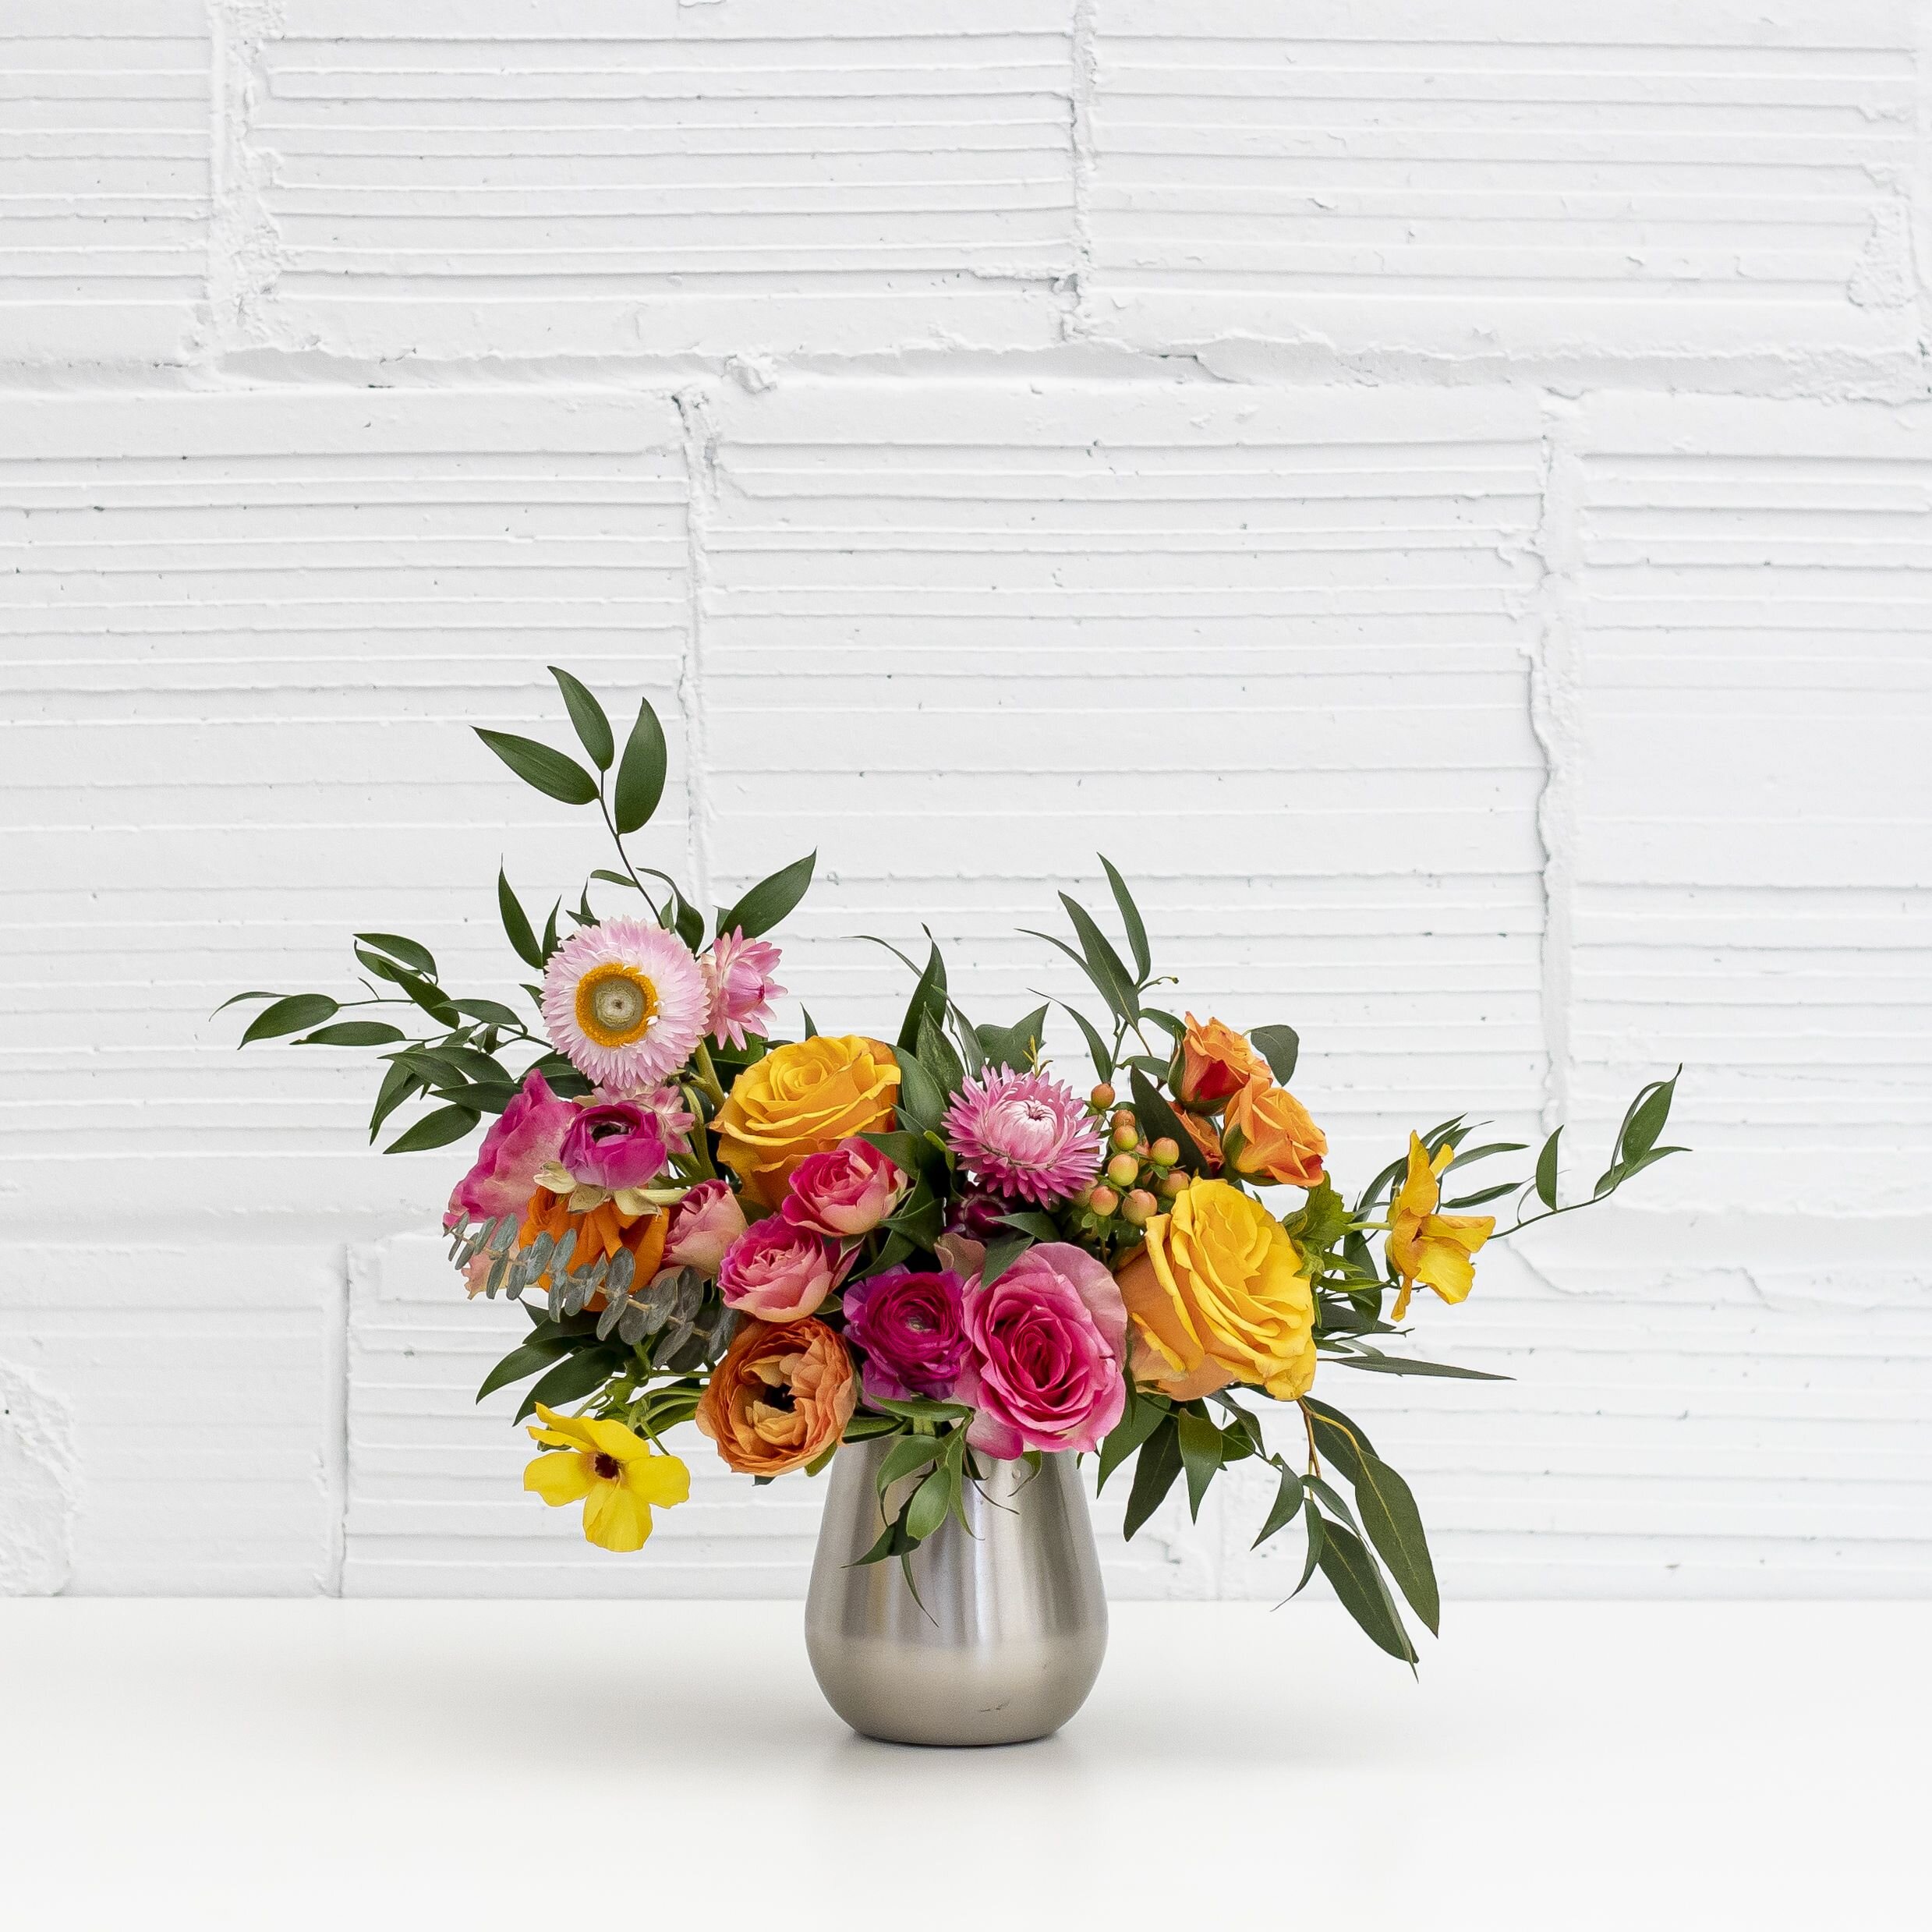 A floral arrangement sitting on a table top with bright pink flowers, yellow flowers, and greenery in a silver vase.